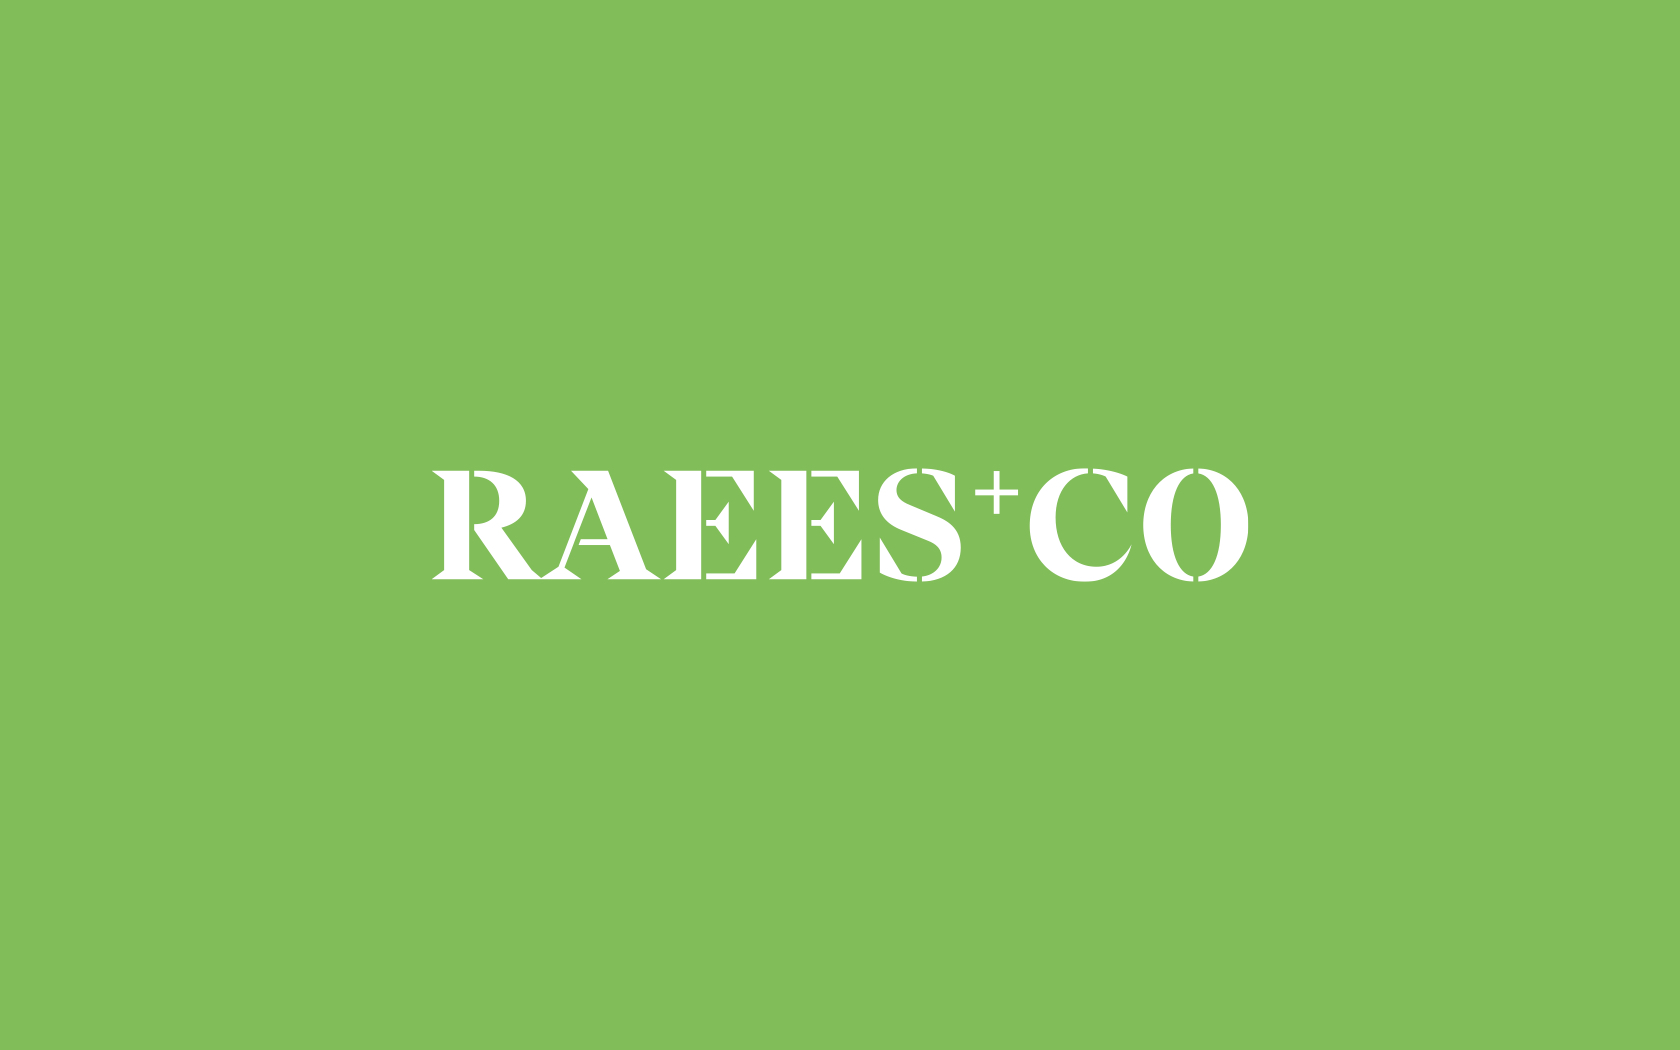 Raees & Co. Brand logo in white